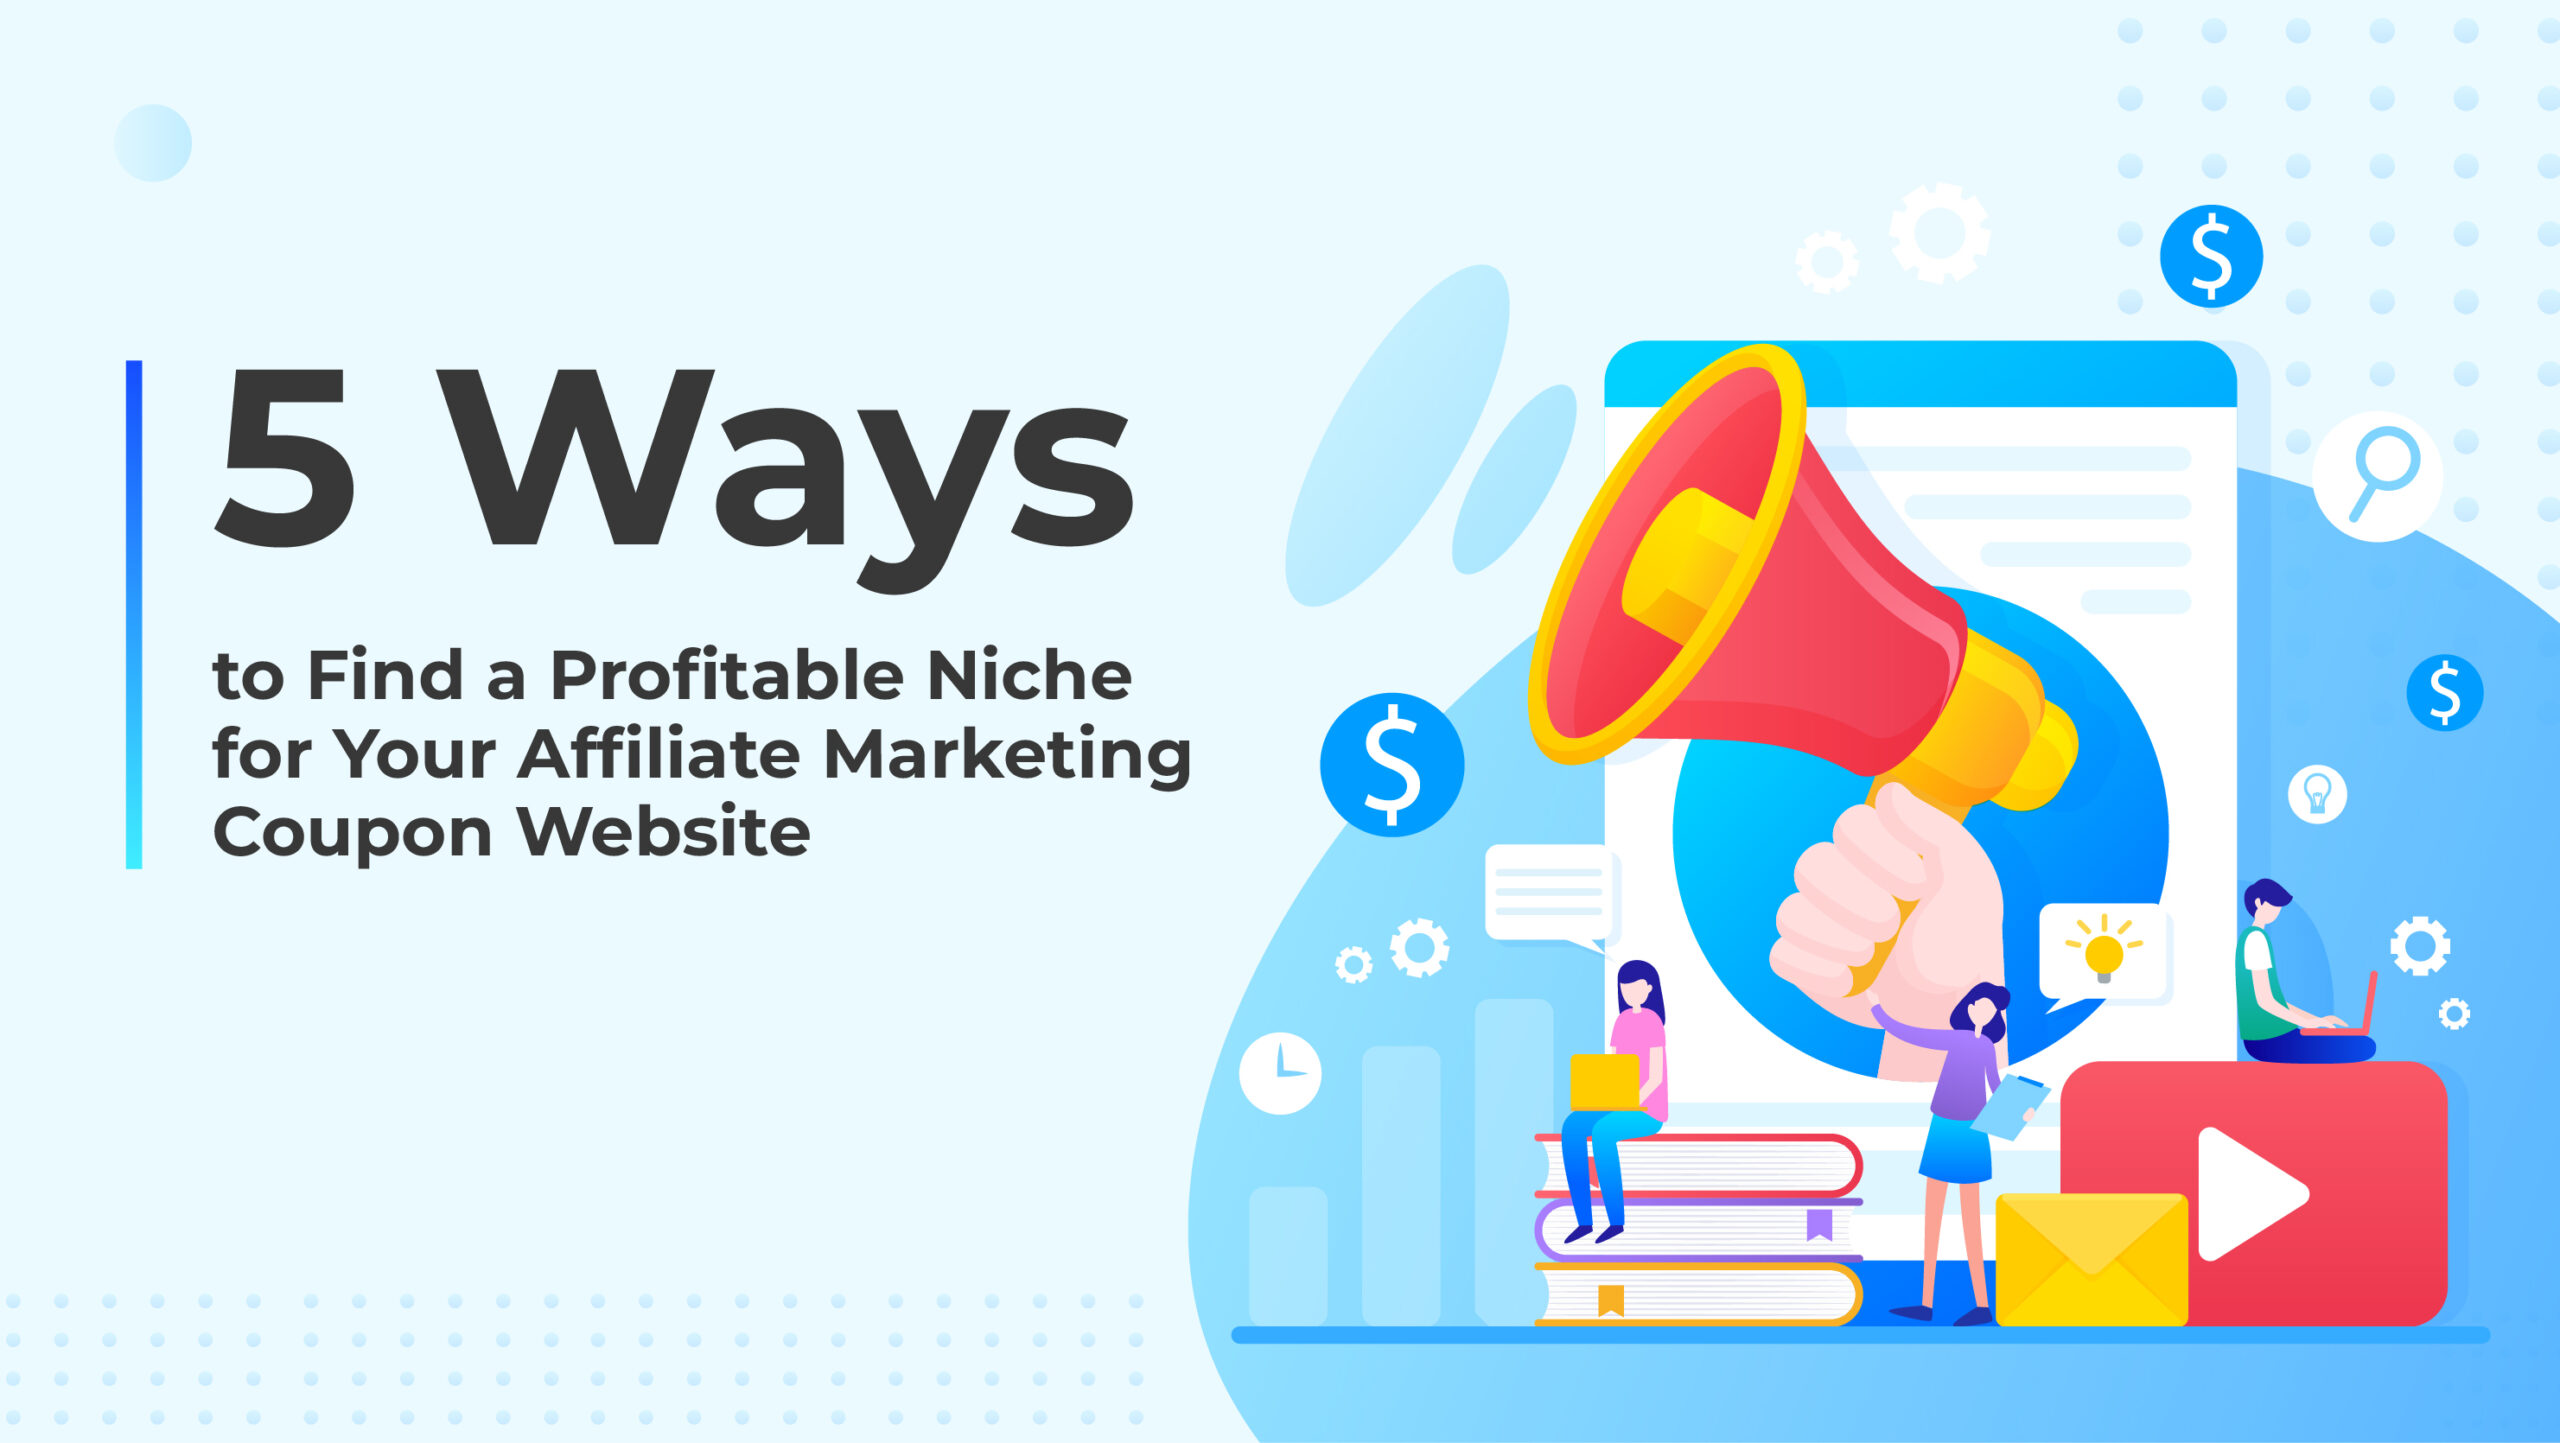 5 Ways to Find a Profitable Niche for Your Affiliate Marketing Coupon Website